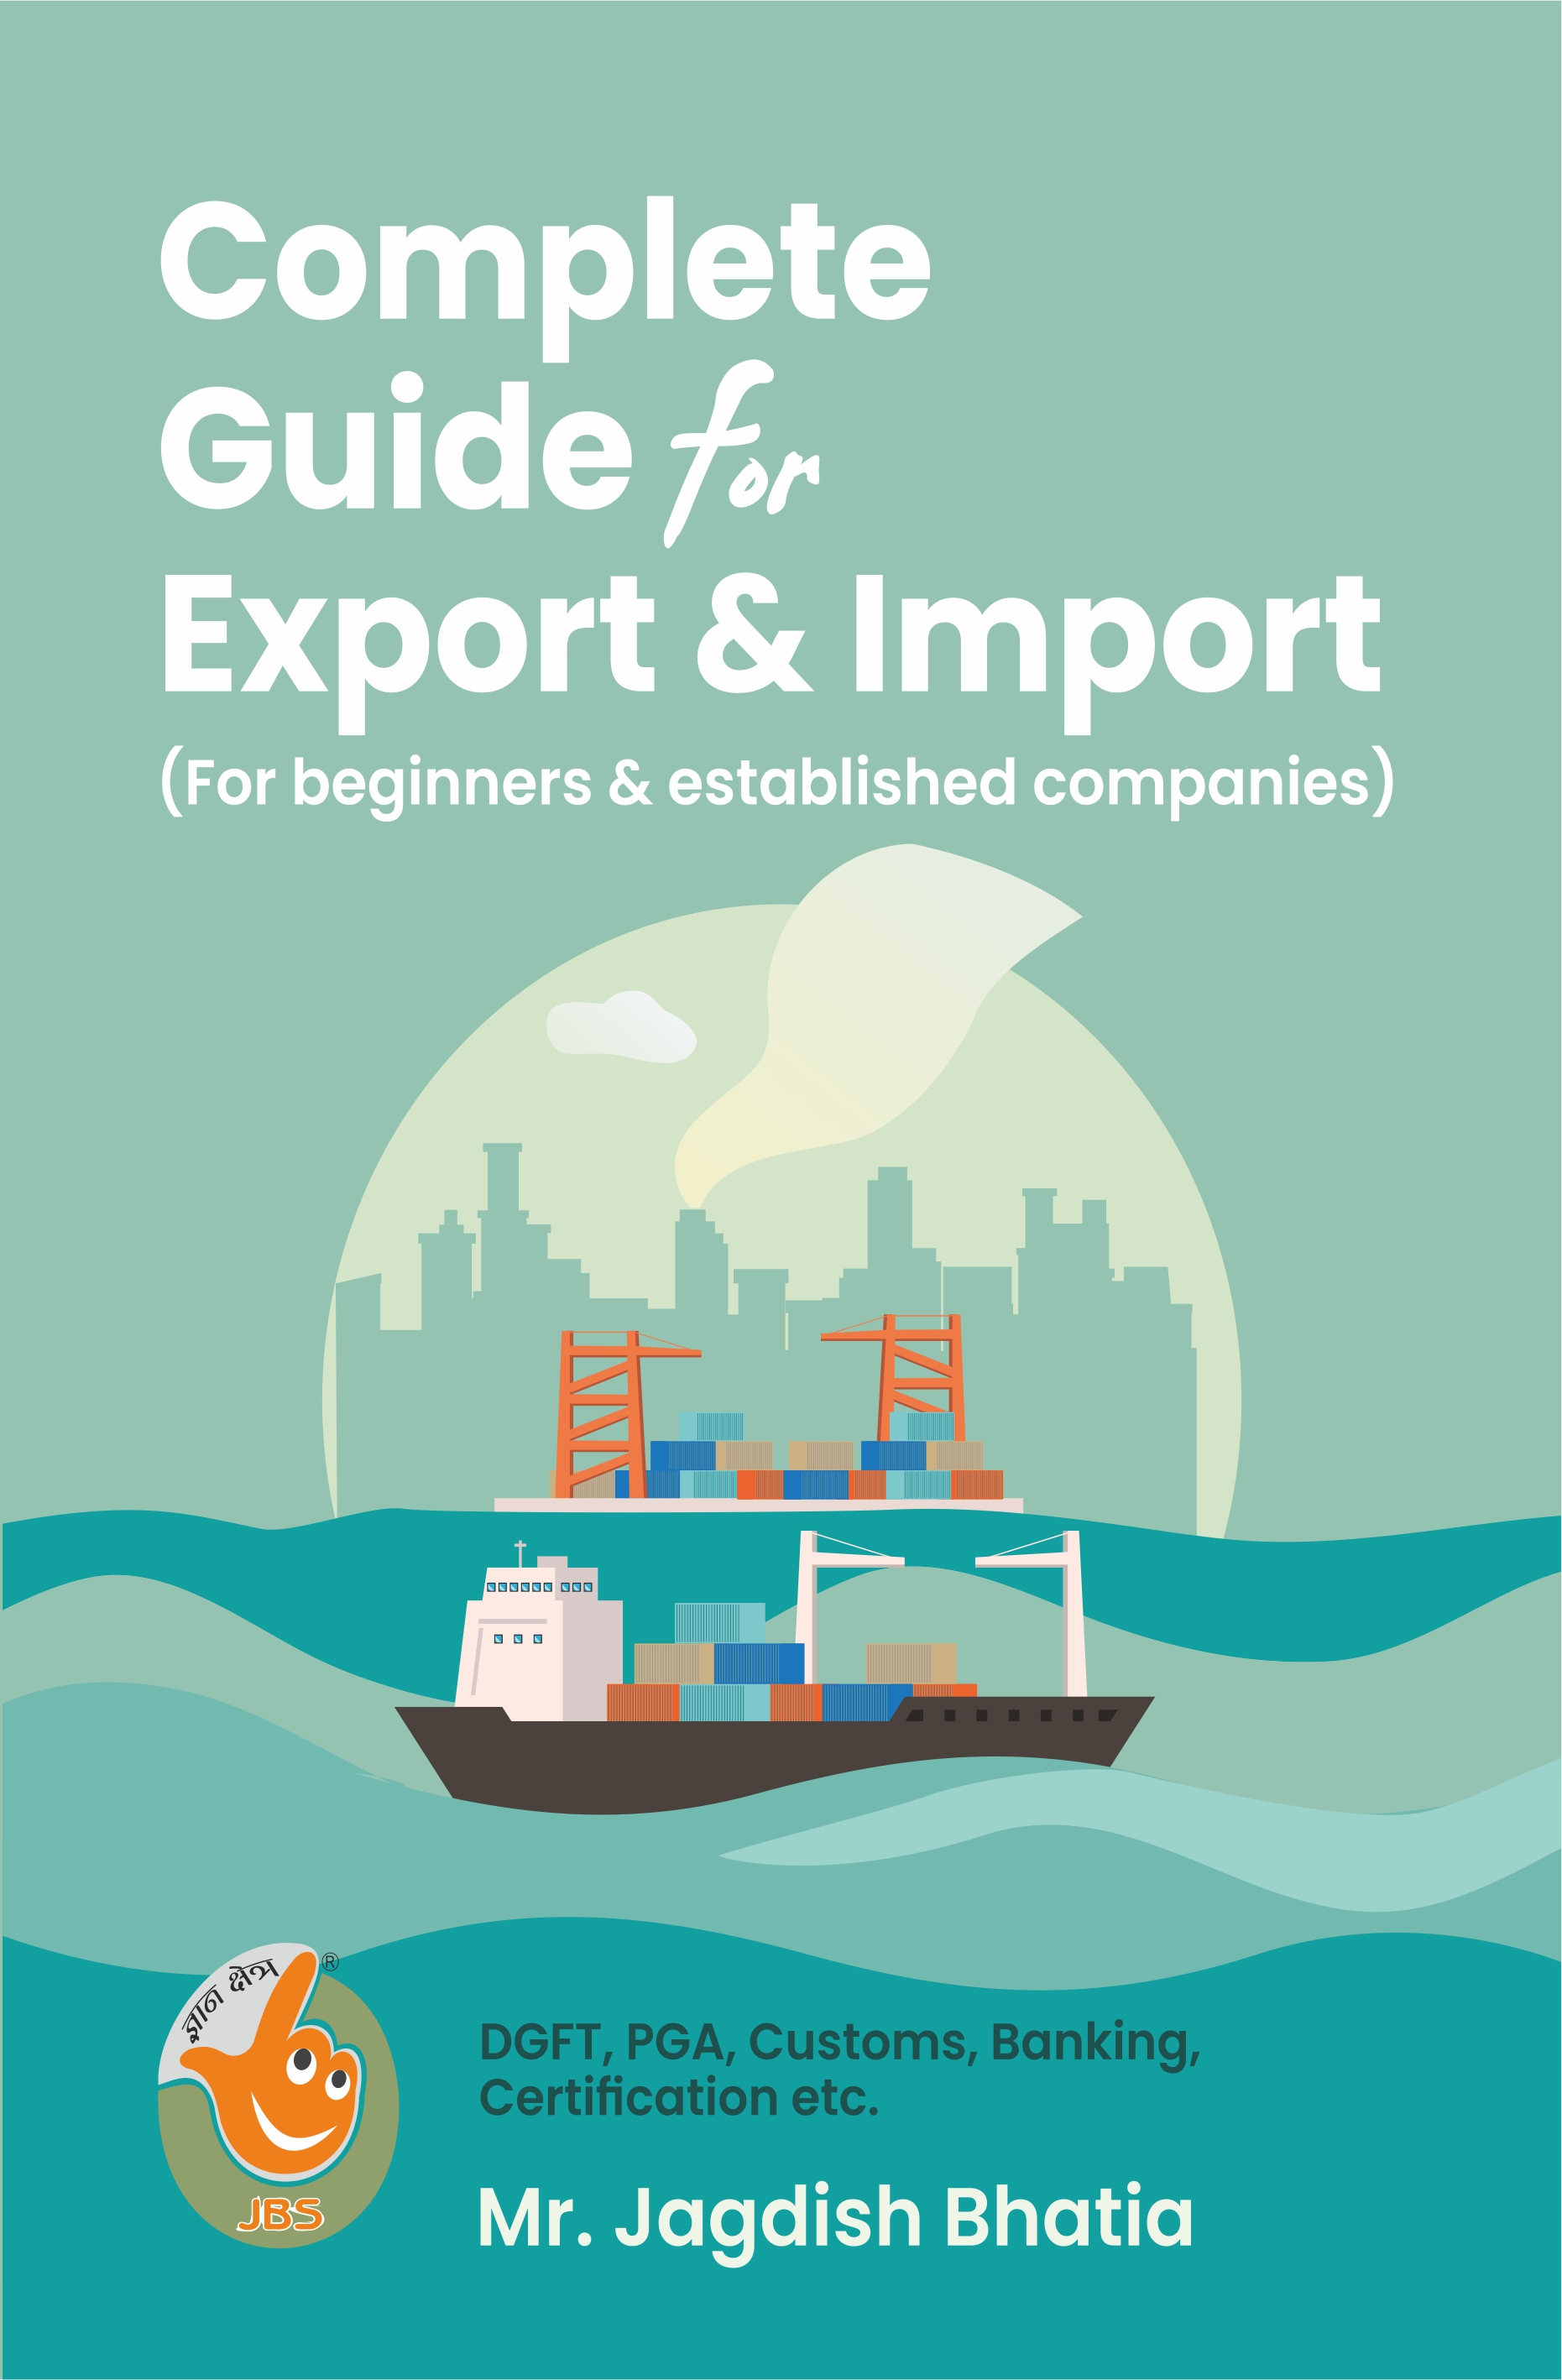 Complete Guide for Export & Import